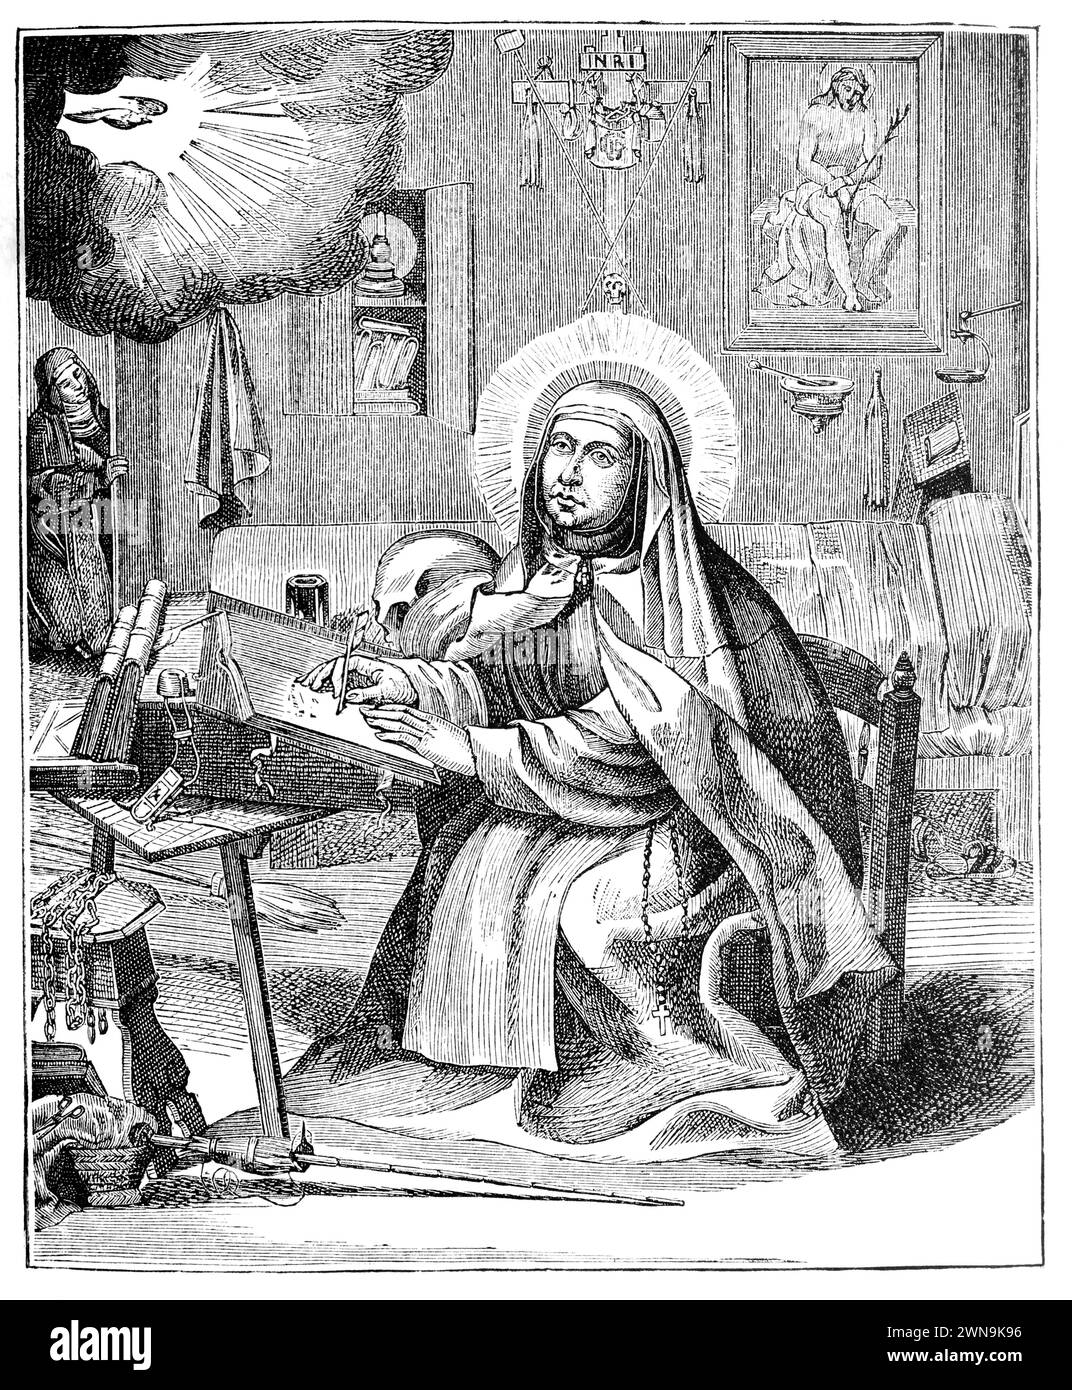 Saint Theresa at her writing desk: Engraving from Lives of the Saints by the Reverend Sabin Baring-Gould, published 1898 Stock Photo